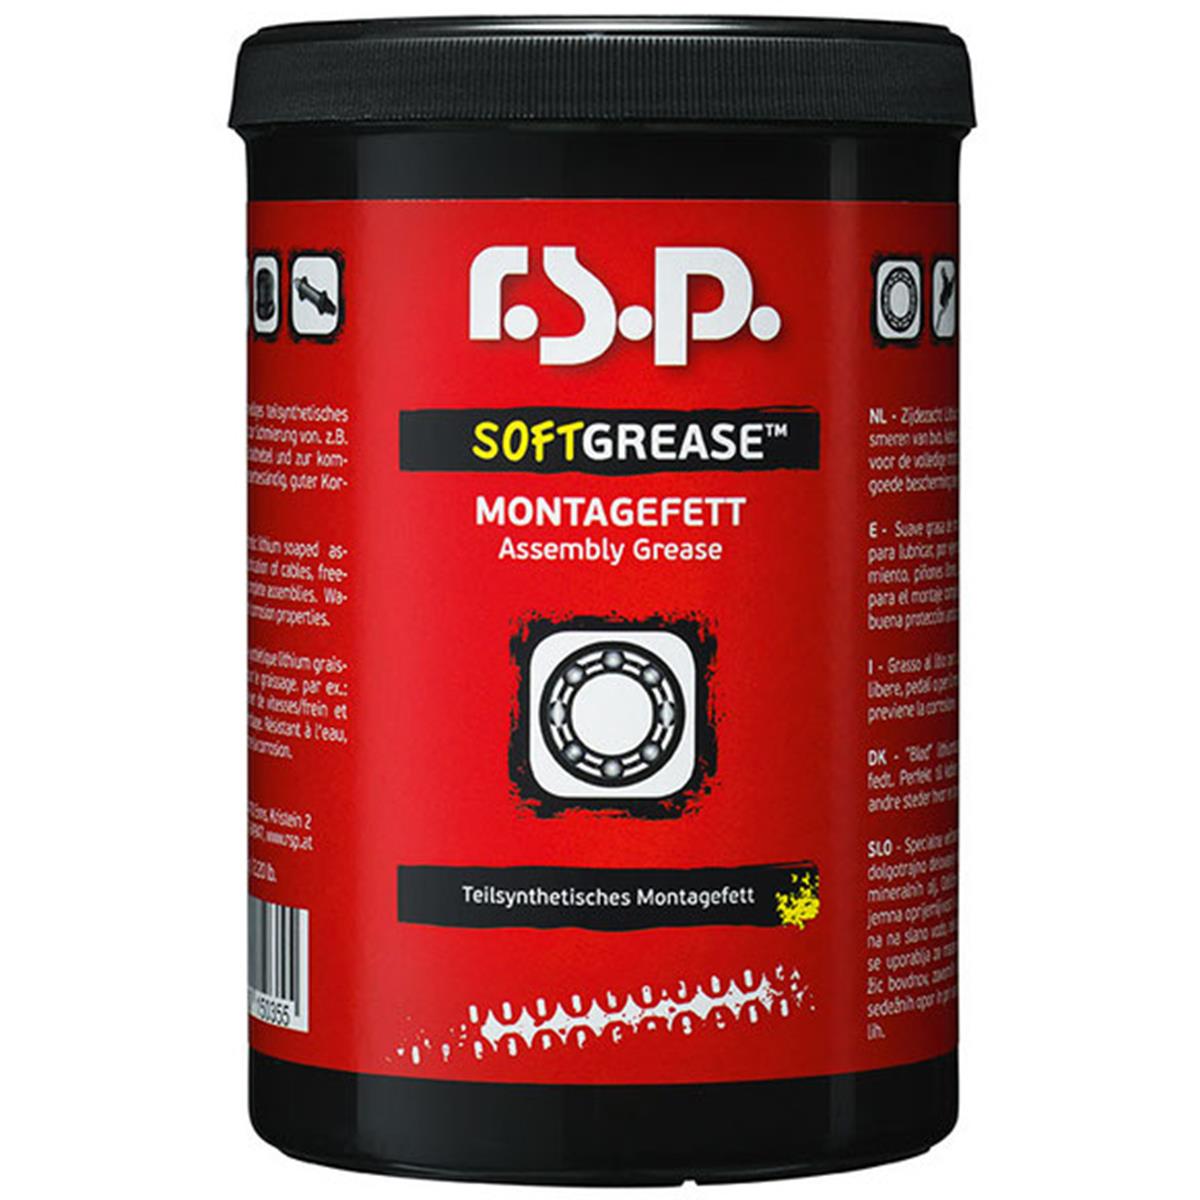 r.s.p. Mounting Grease Soft Grease 500 g